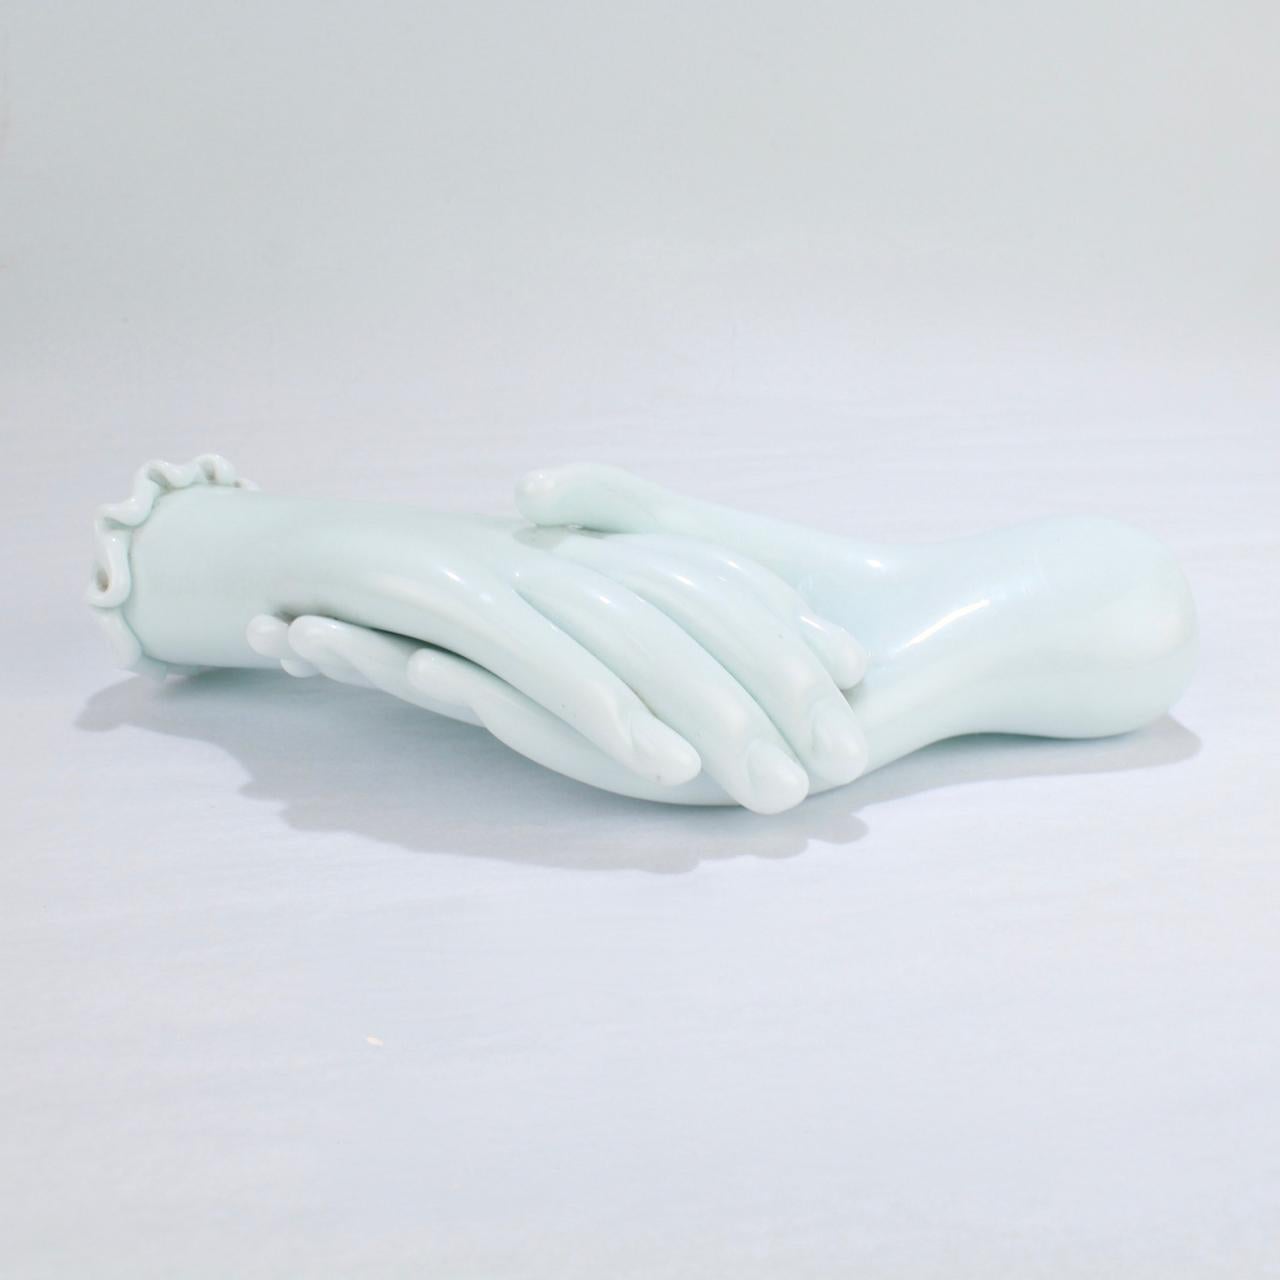 An exceptionally rare figurine by Fulvio Bianconi for Venini & Co.

Referred to as 'Handshake', the model consists of a gloved hand with a scalloped cuff shaking hands with a naked hand in lattimo glass.

This model was part of important series